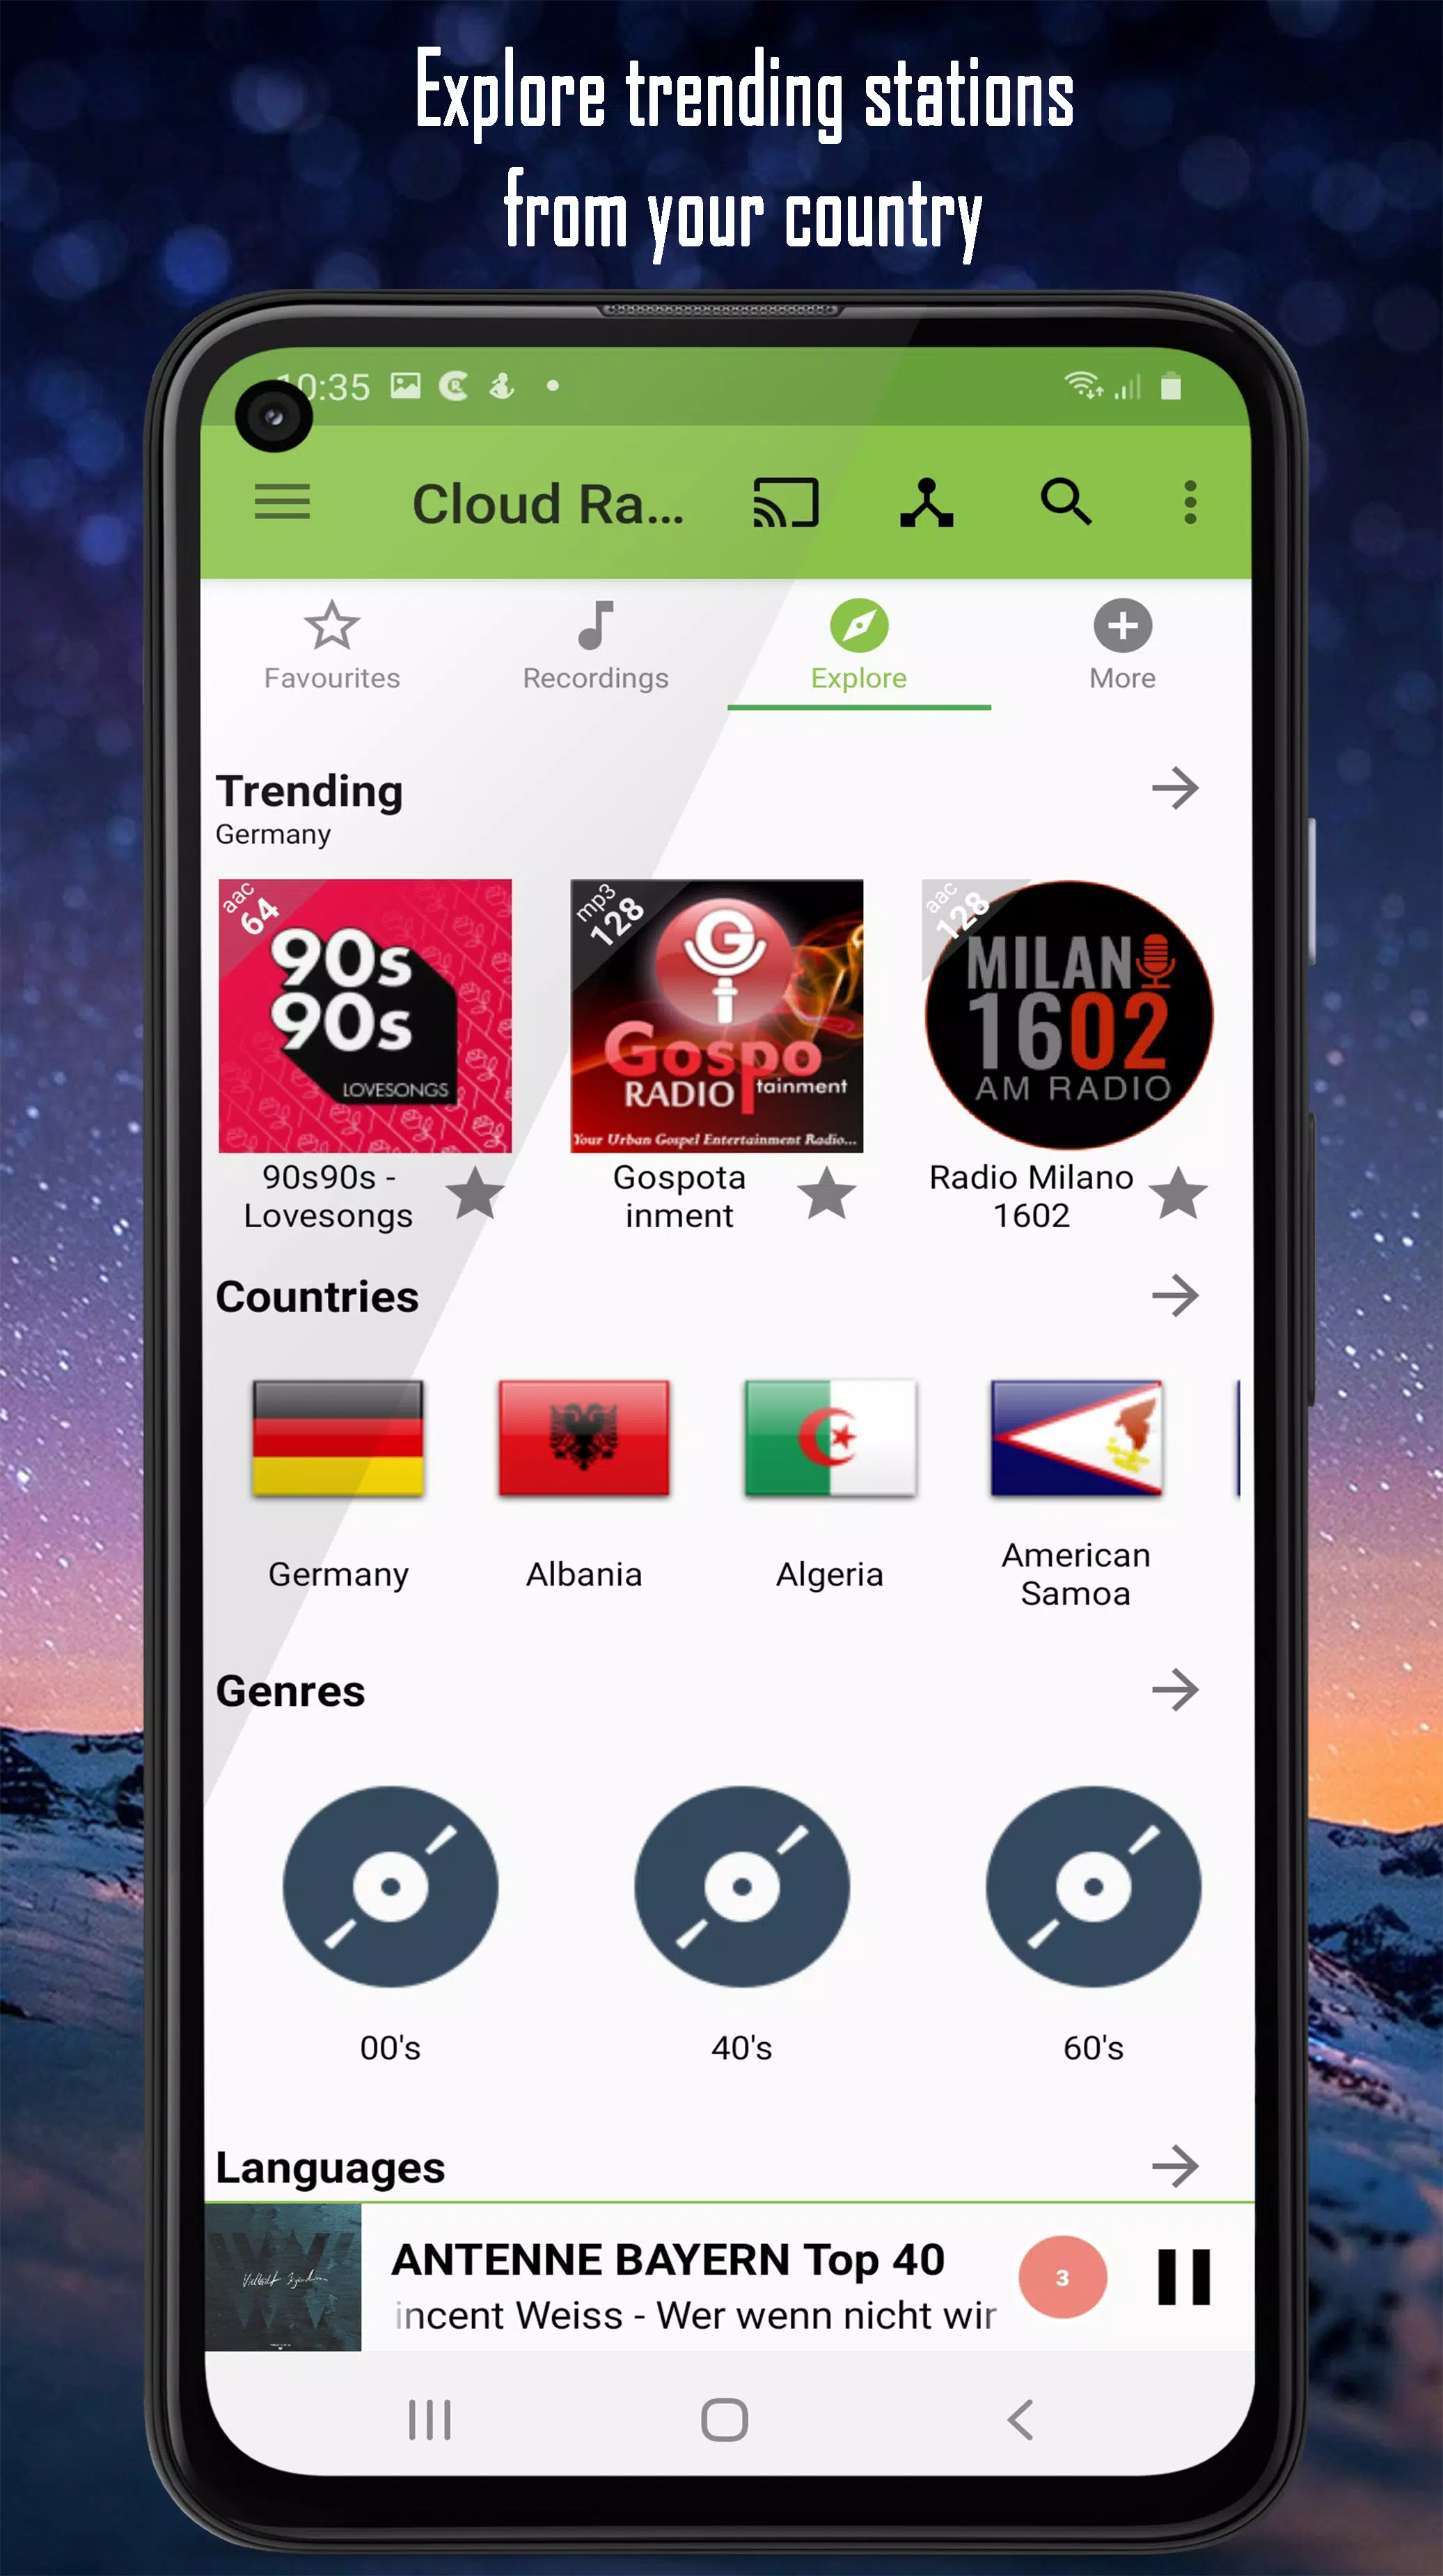 Cloud Radio for Android - APK Download